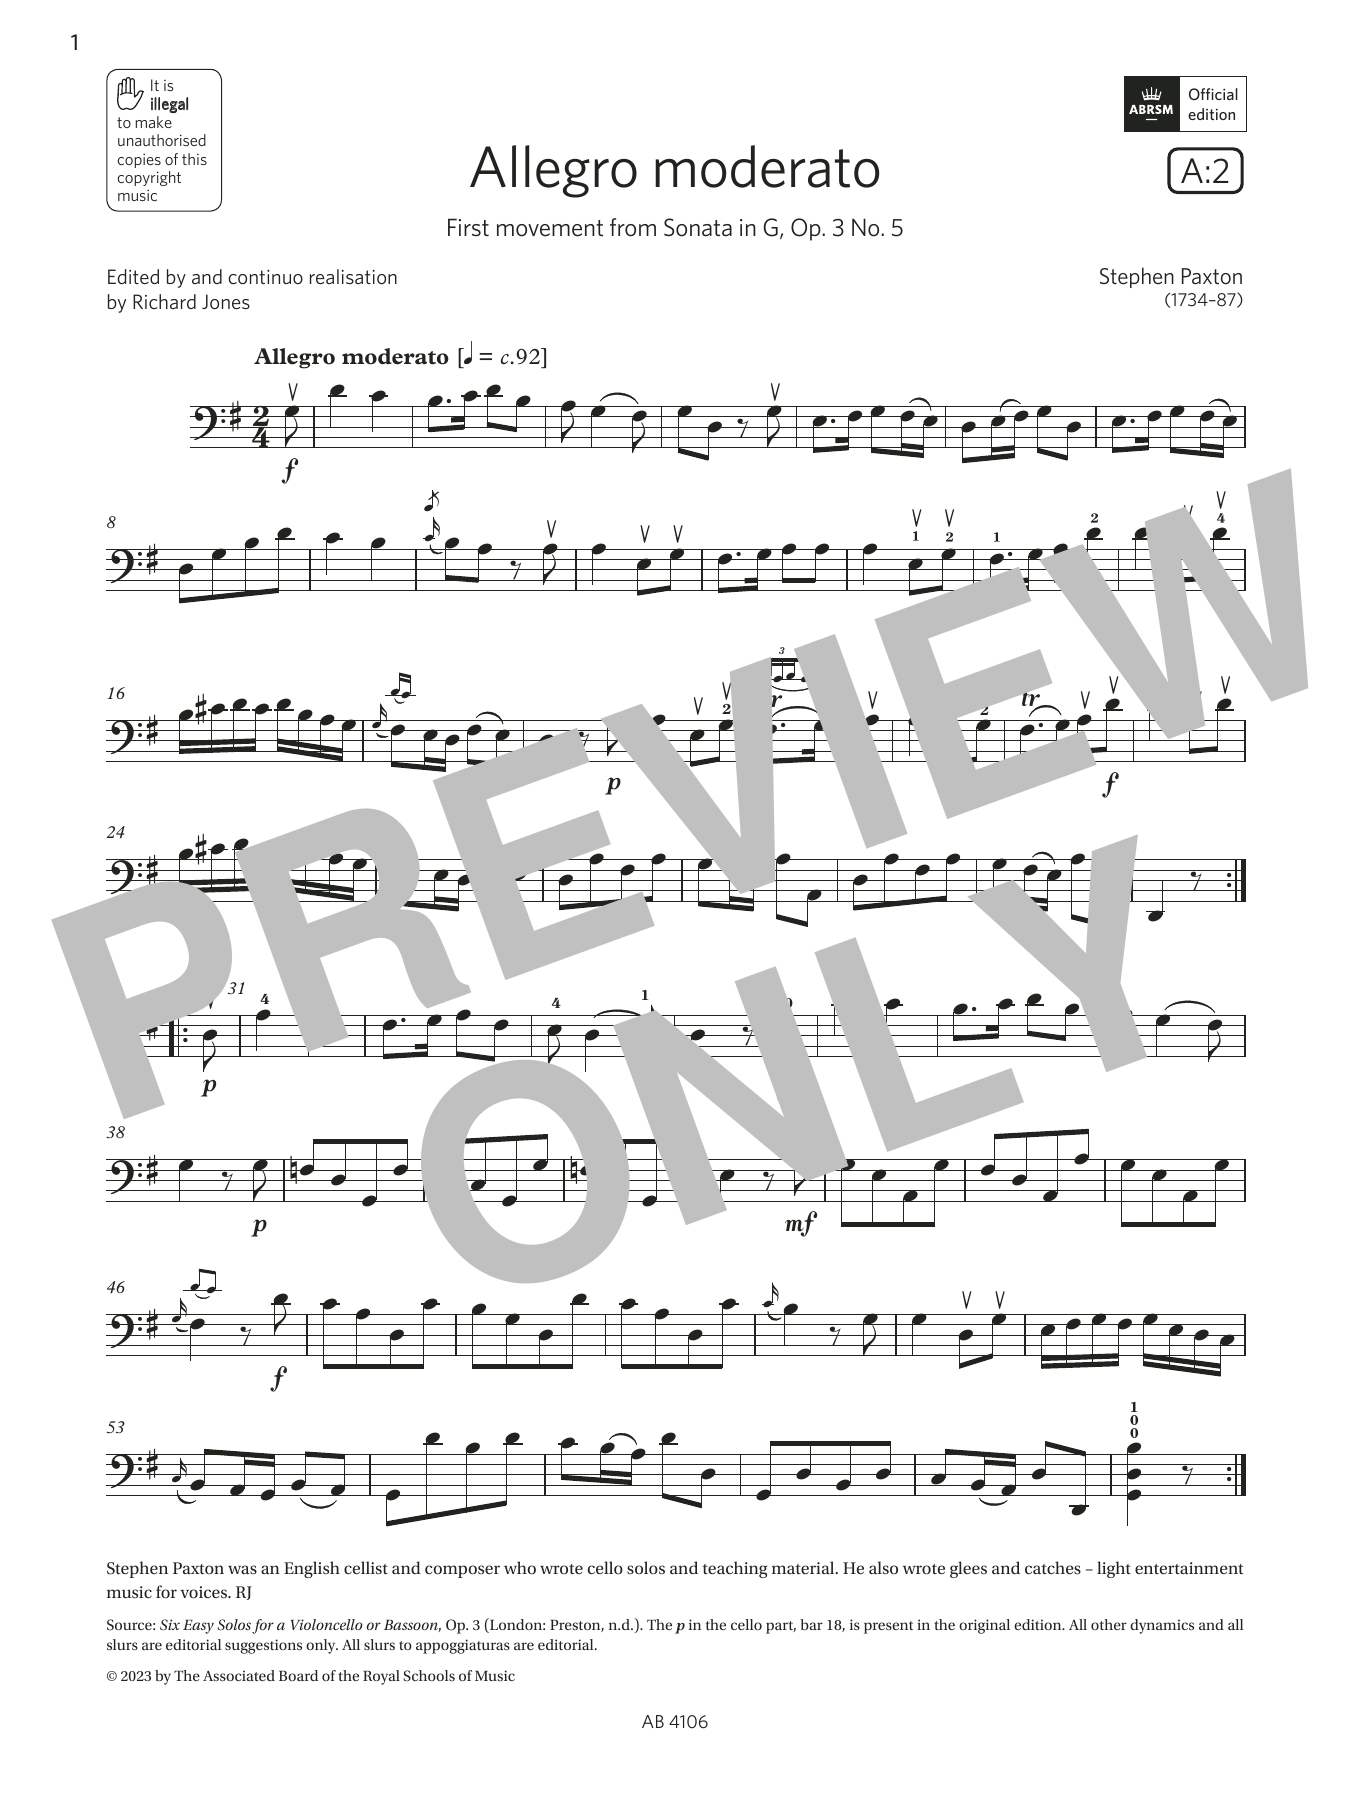 Download Stephen Paxton Allegro moderato (Grade 3, A2, from the Sheet Music